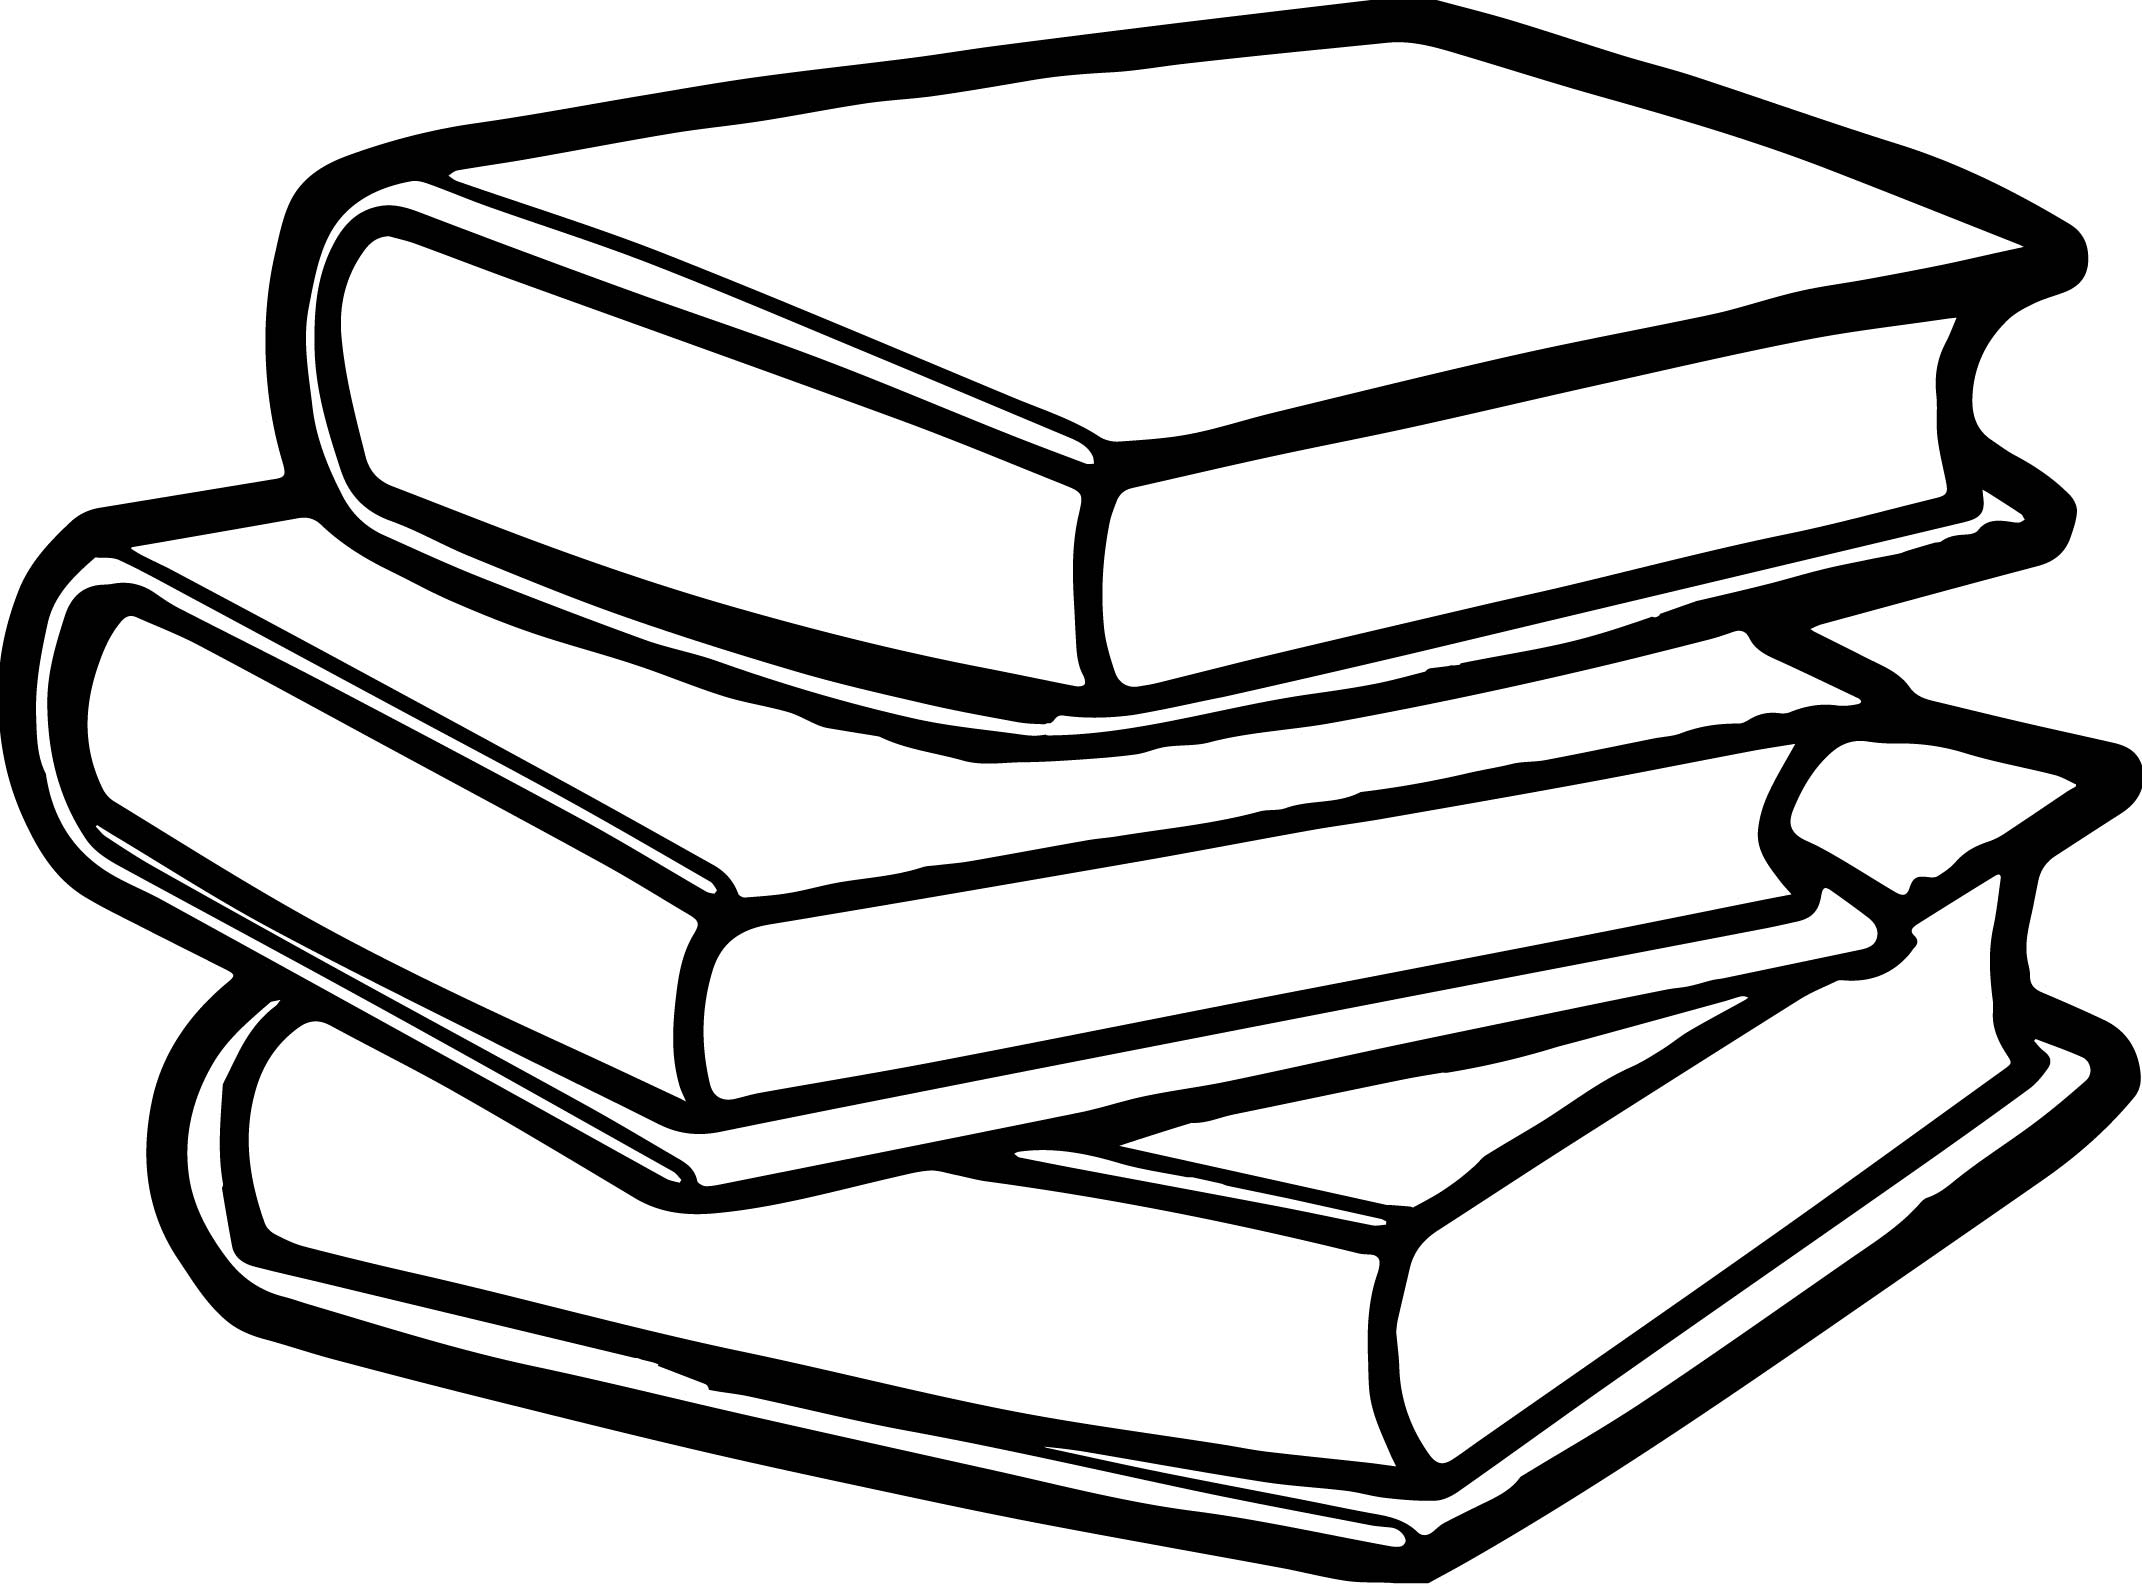 Books Coloring Pages   Coloring Cool